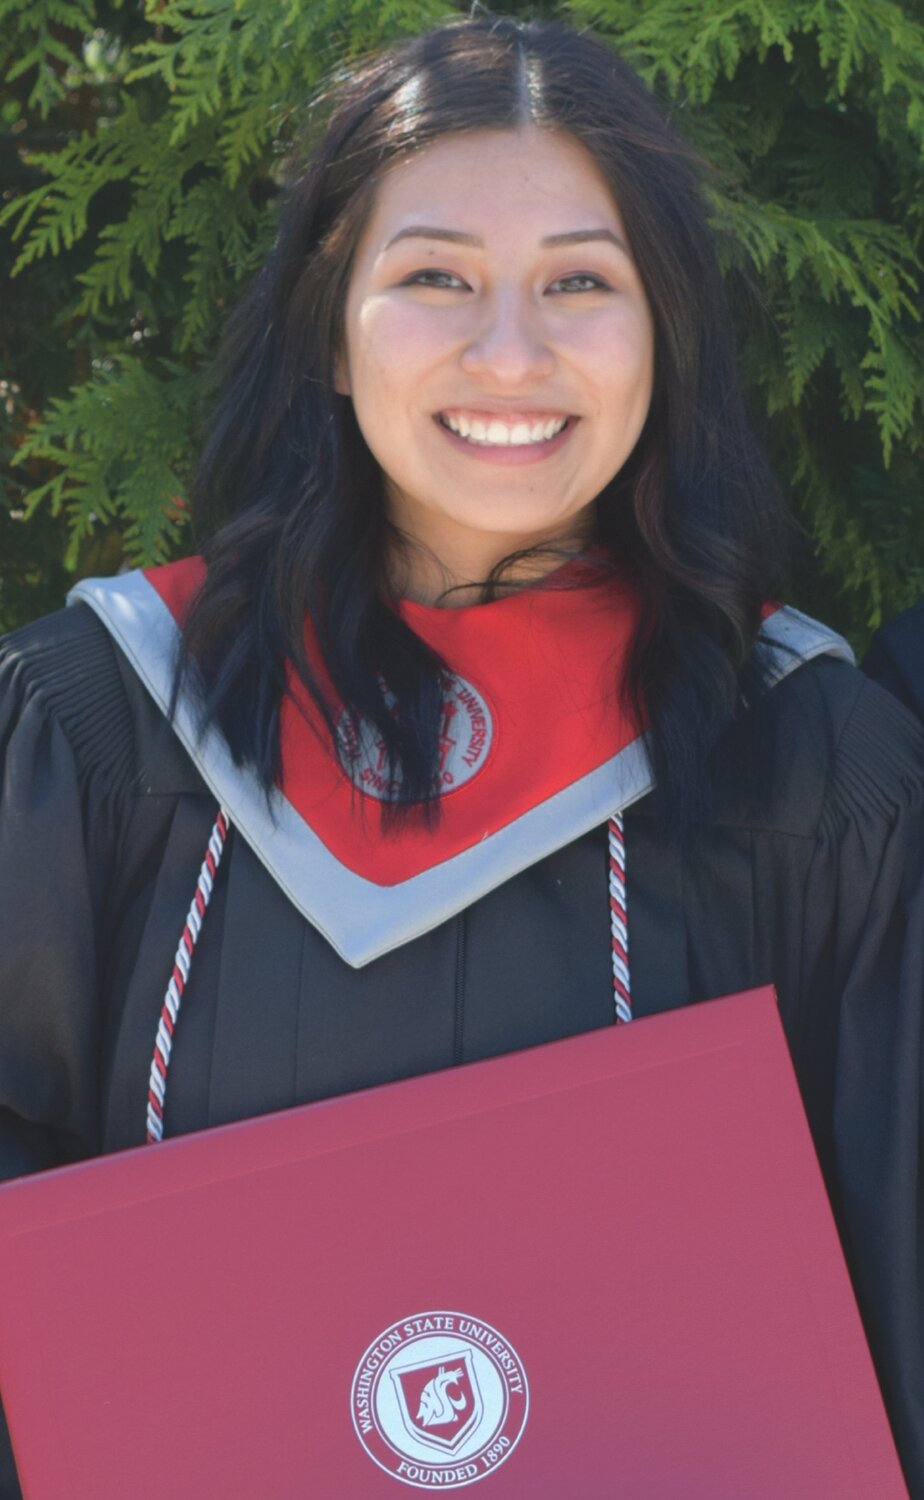 Diana graduated on May 12 and became the first one in her family to graduate with a B.A.